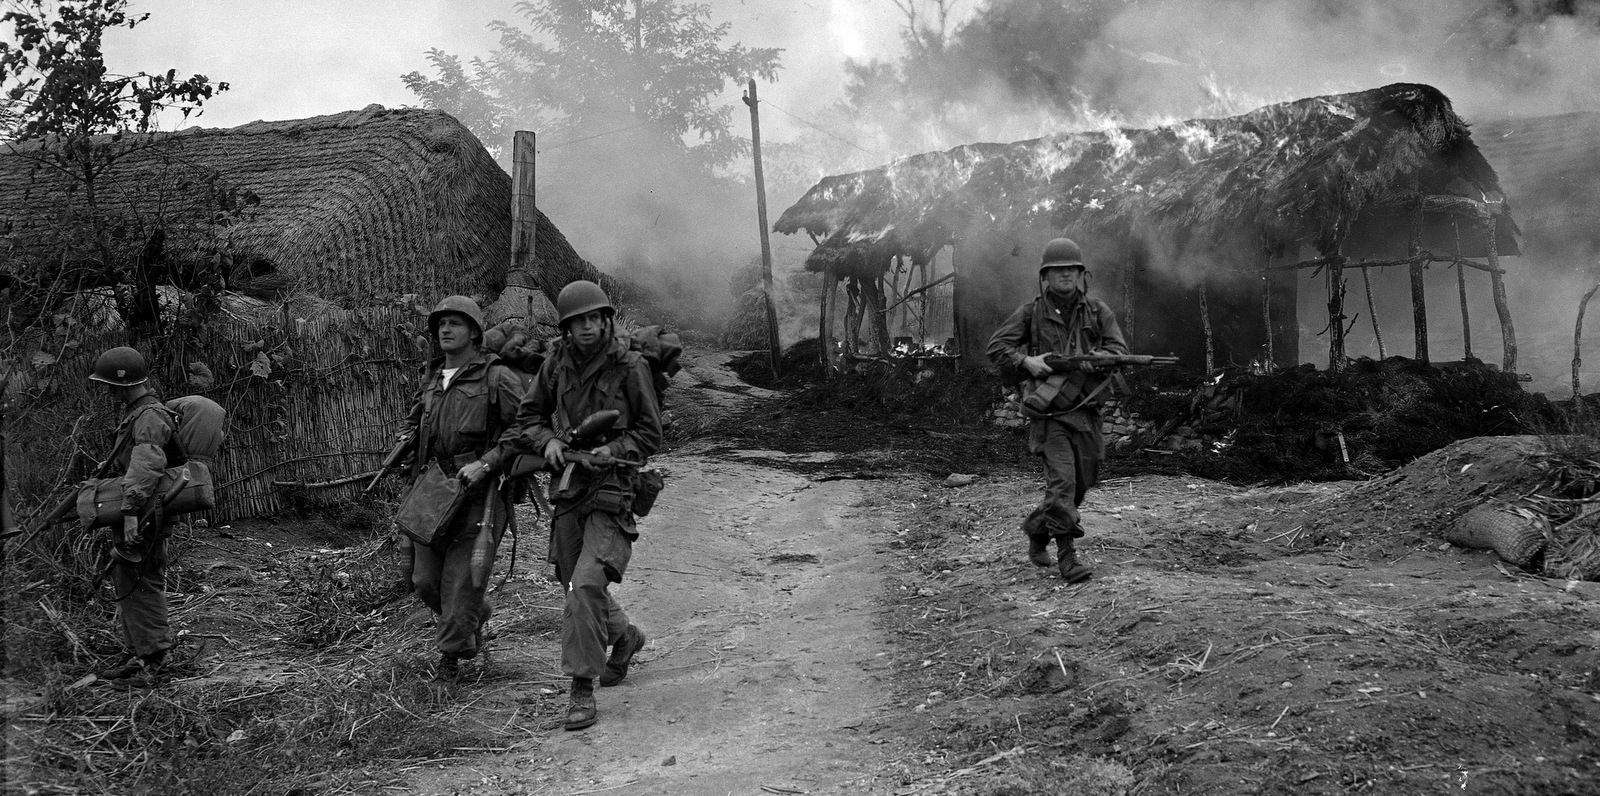 U.S. troopers move through burning shacks in the Sunchon/Sukchon area of North Korea, Oct. 20, 1950. (AP/Max Desfor)